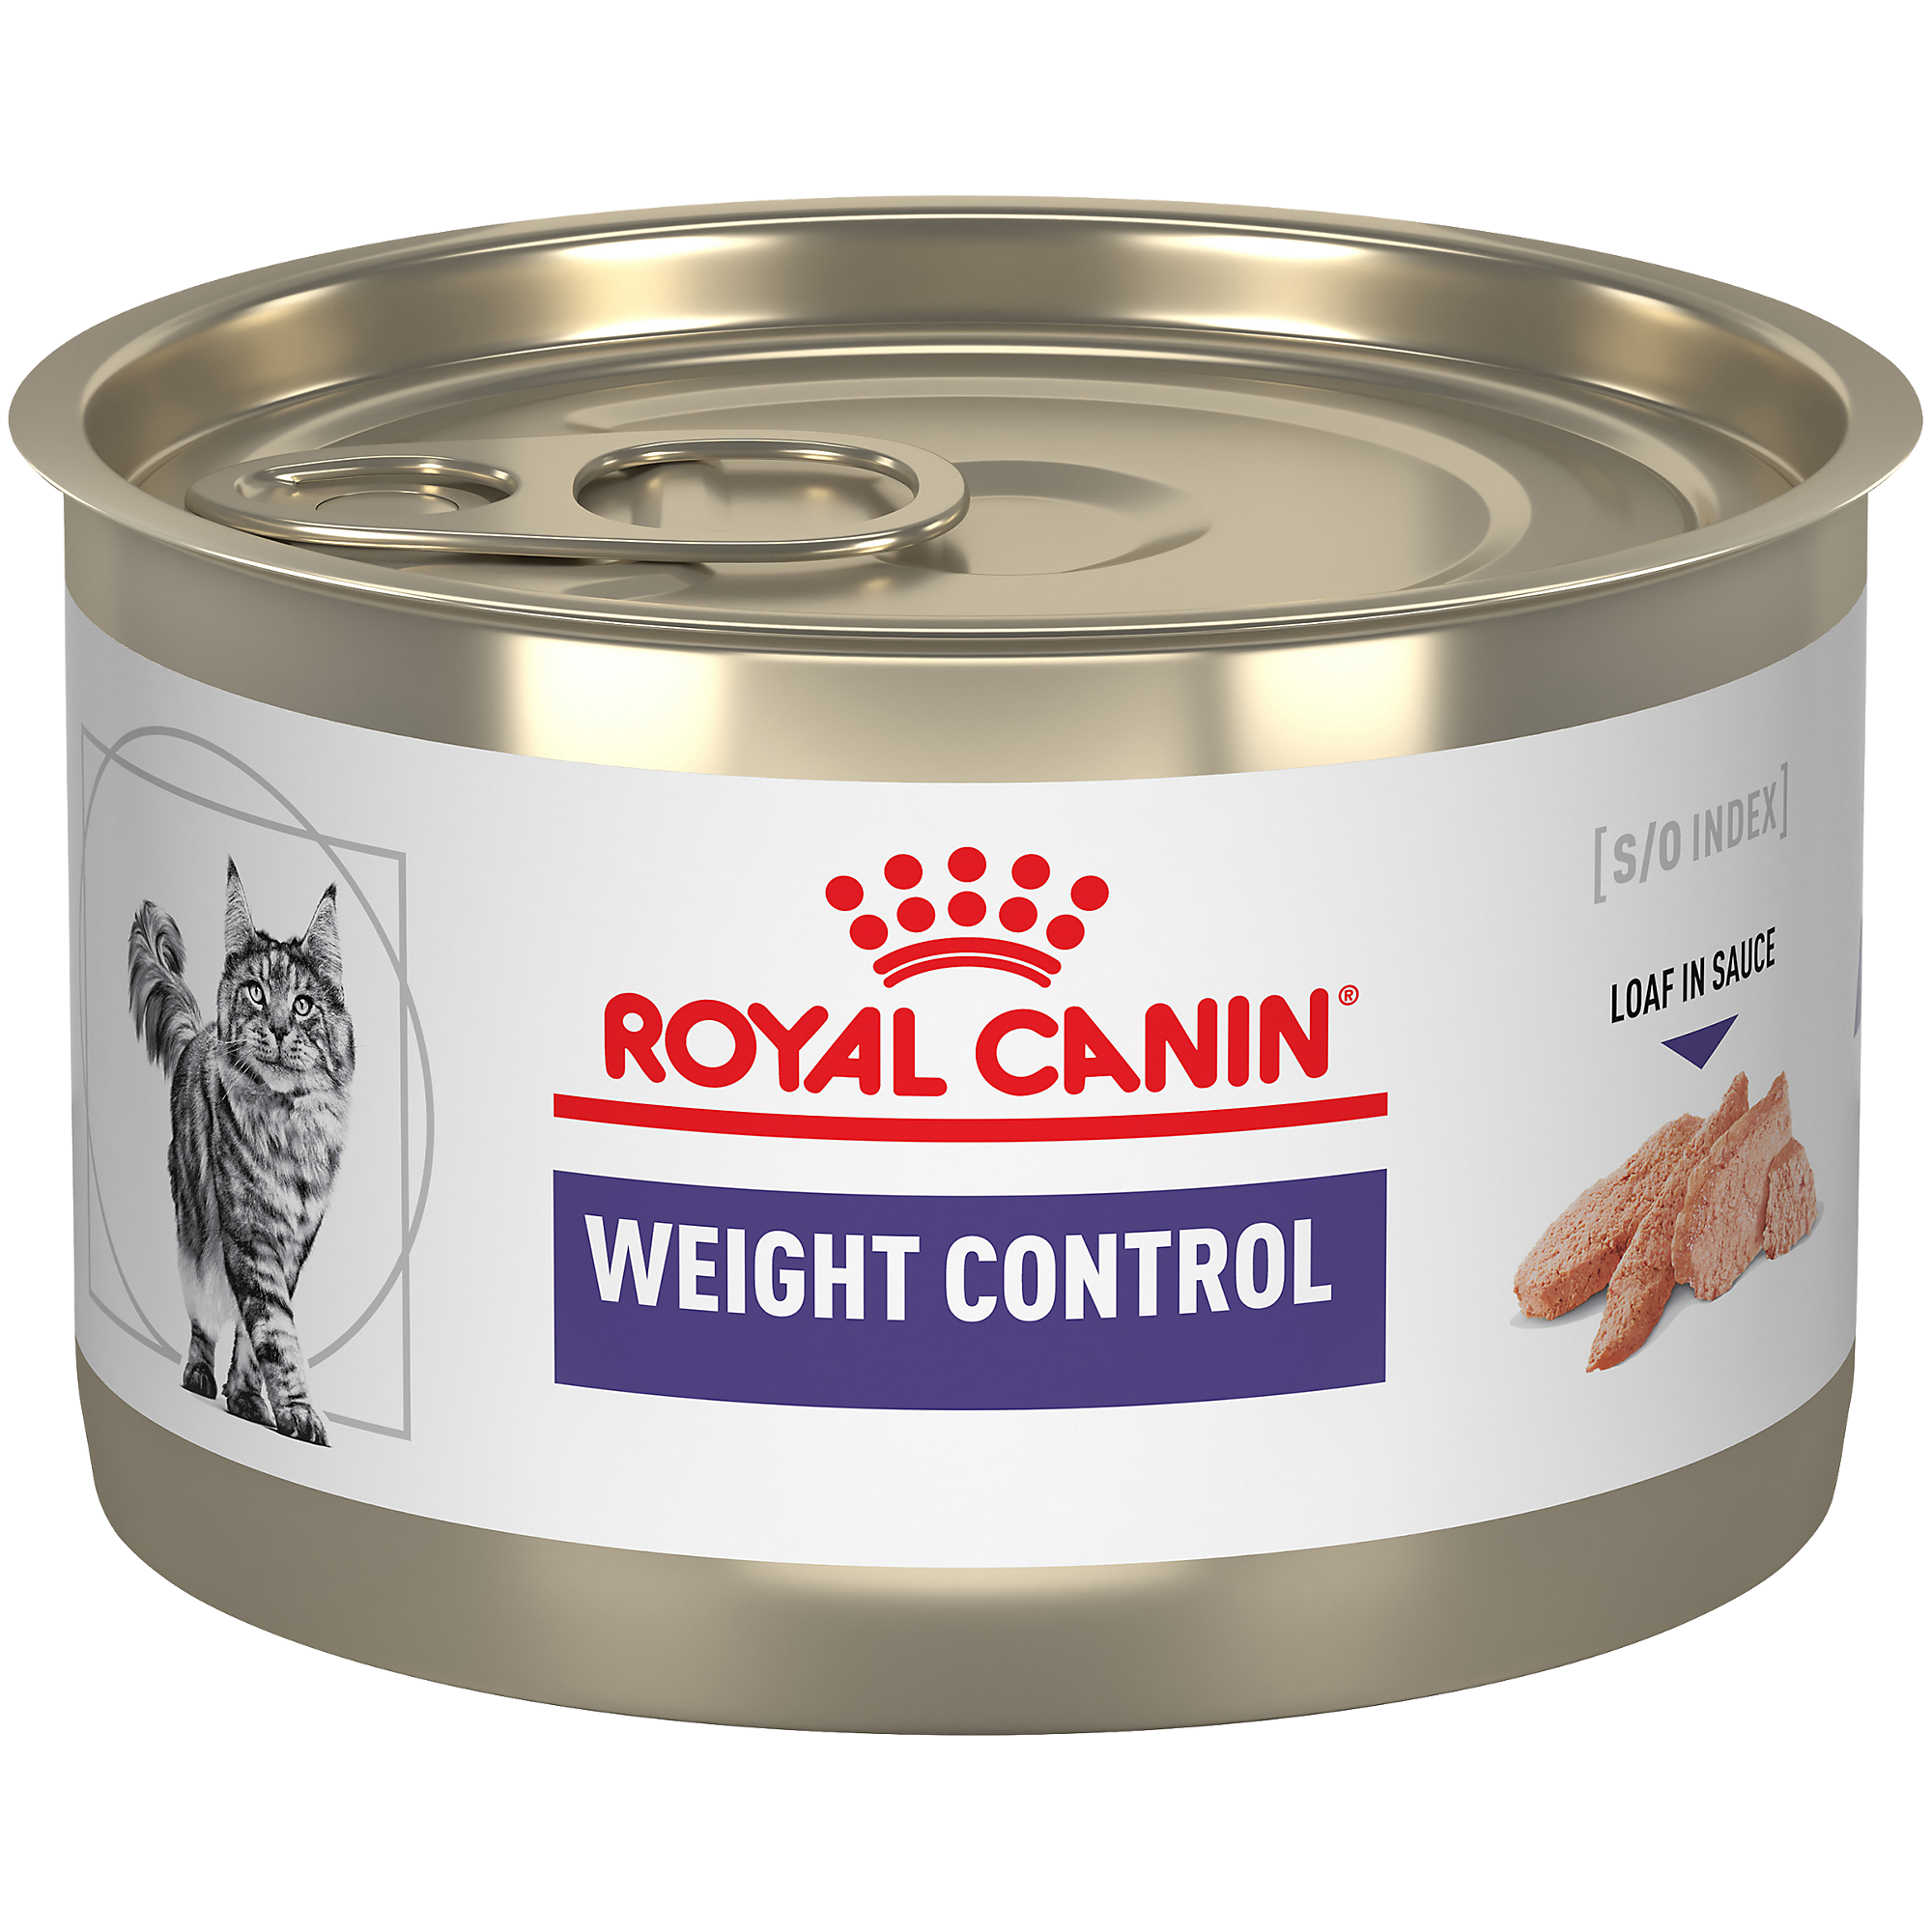 Royal Canin® Feline Weight Control Loaf in Sauce Canned Cat Food, 5.1 oz